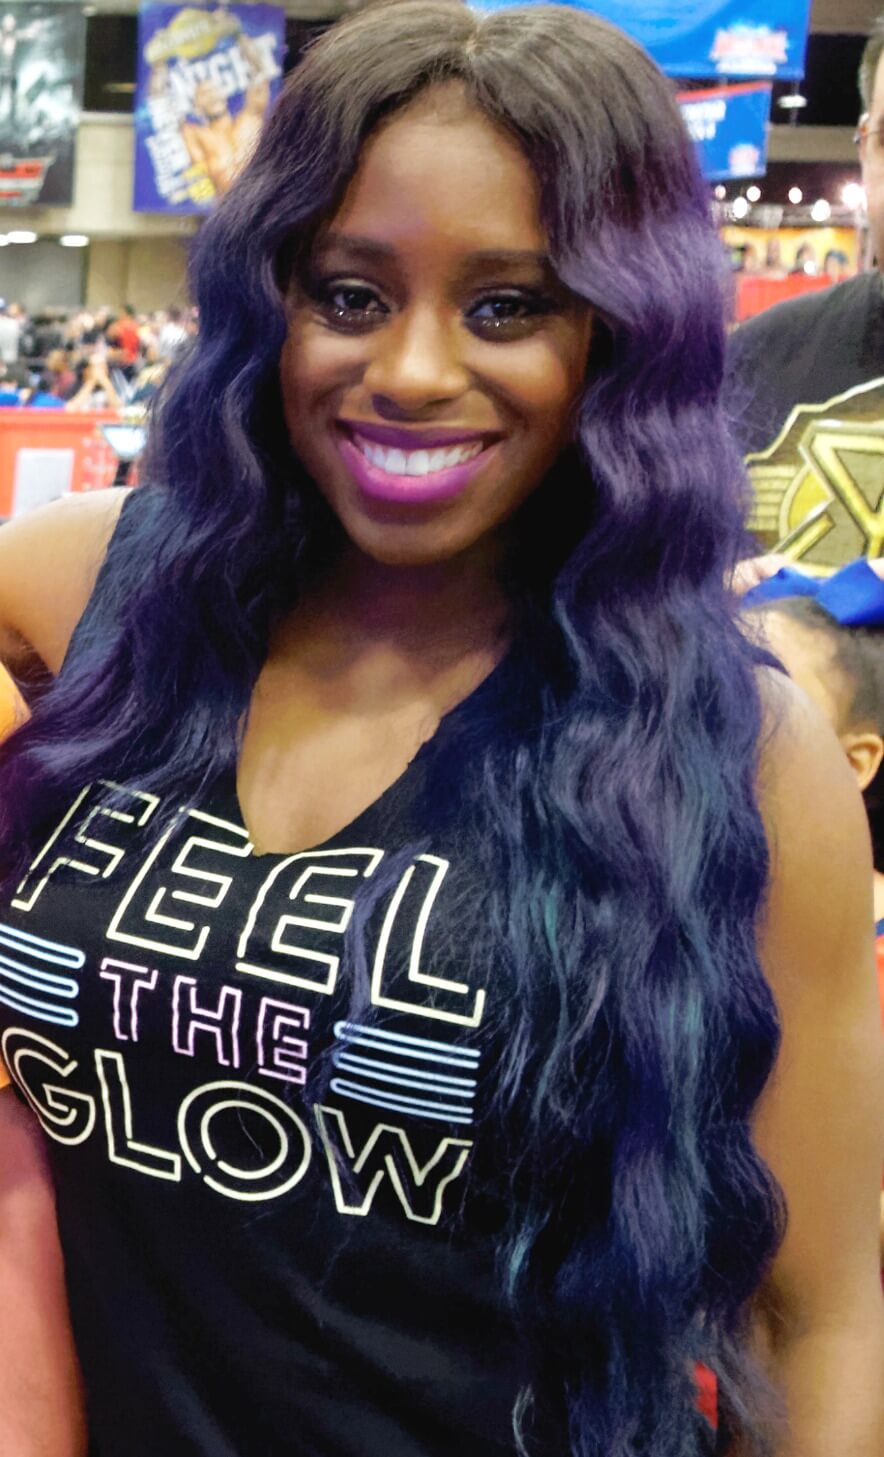 70+ Hot Pictures Of Naomi a.k.a Trinity Fatu from WWE Will Leave You Gasping For Her 22